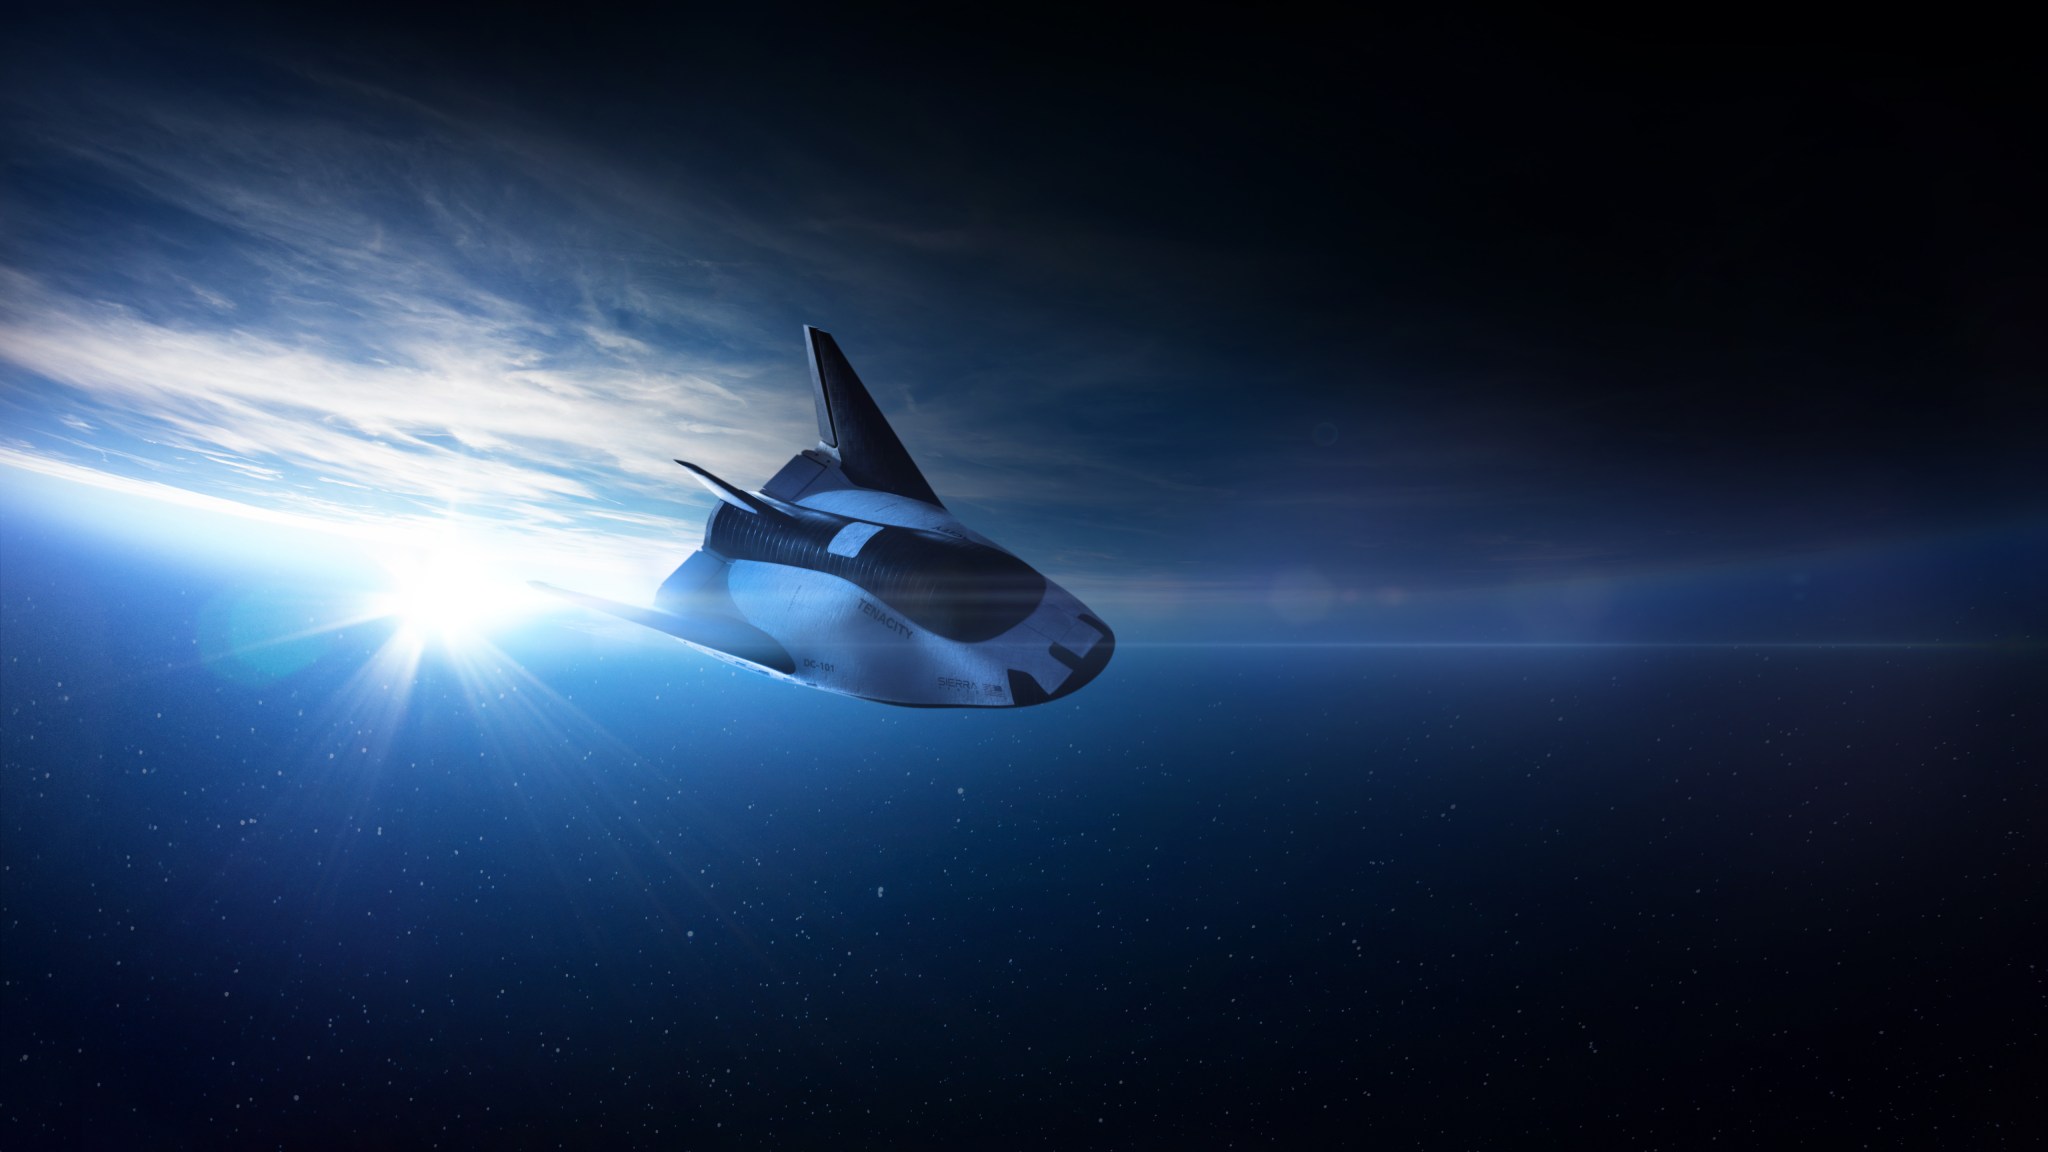 NASA and Sierra Space are making progress on the first flight of the company’s Dream Chaser spacecraft to the International Space Station. The uncrewed cargo spaceplane is planned to launch its demonstration mission in 2024 to the orbital complex as part of NASA’s commercial resupply services.